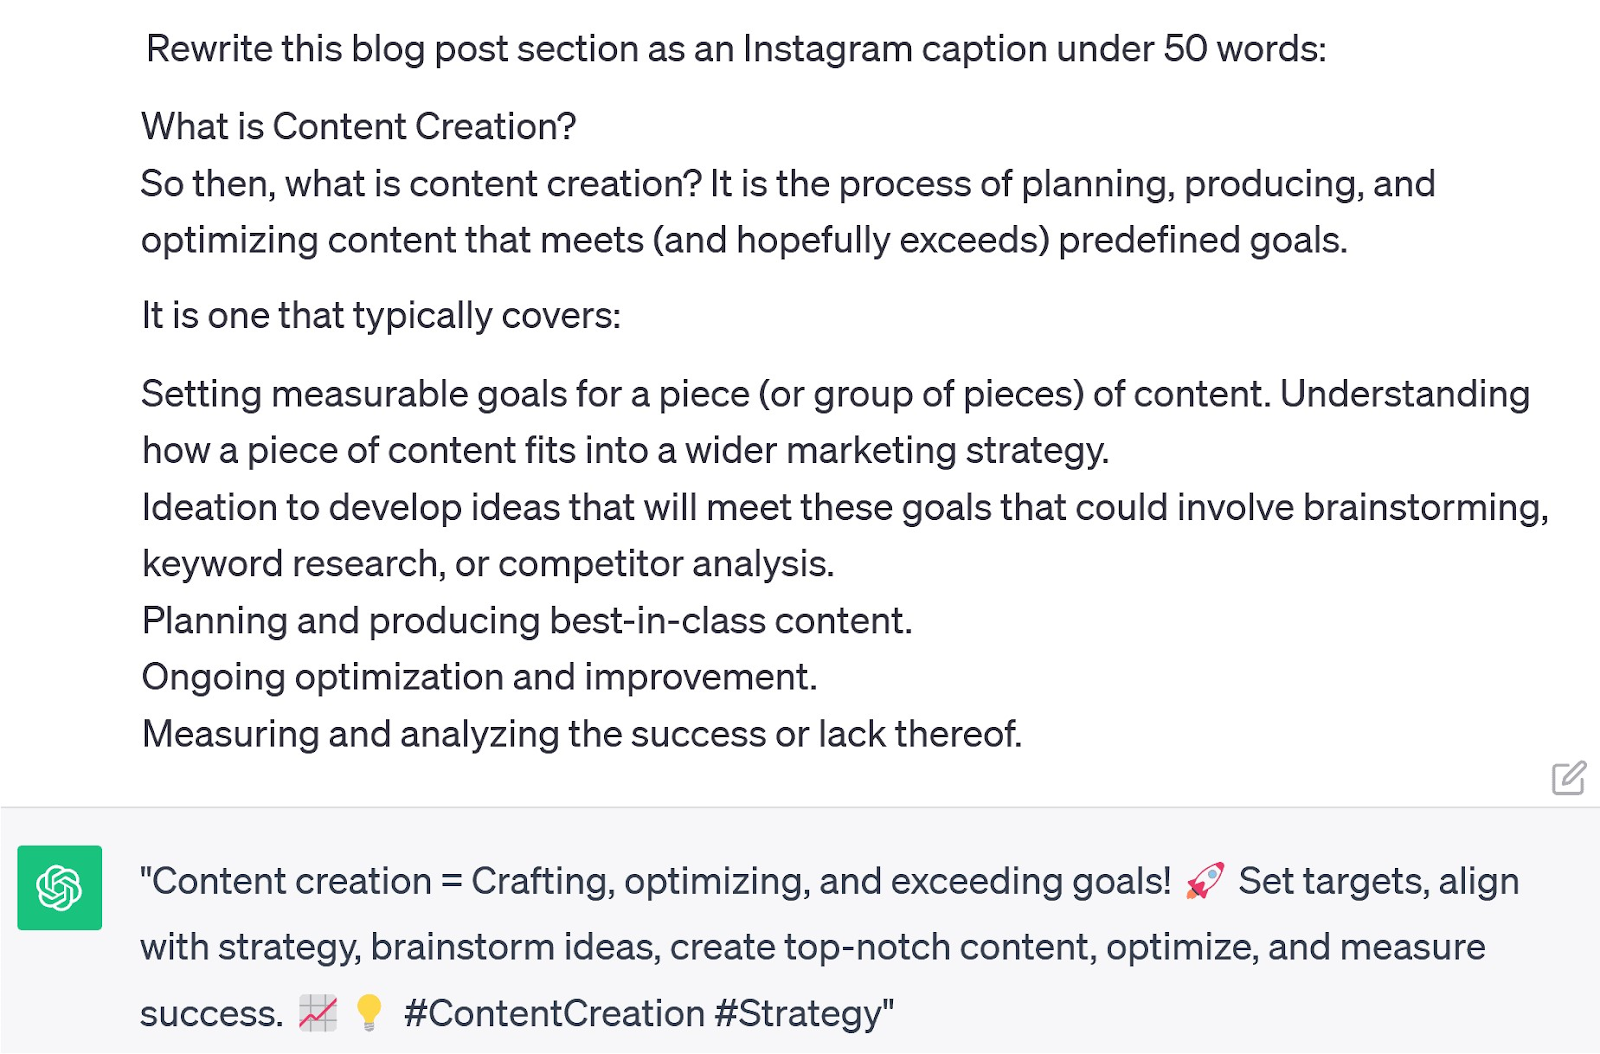 A new prompt asking ChatGPT to rewrite a blog post section as an Instagram caption